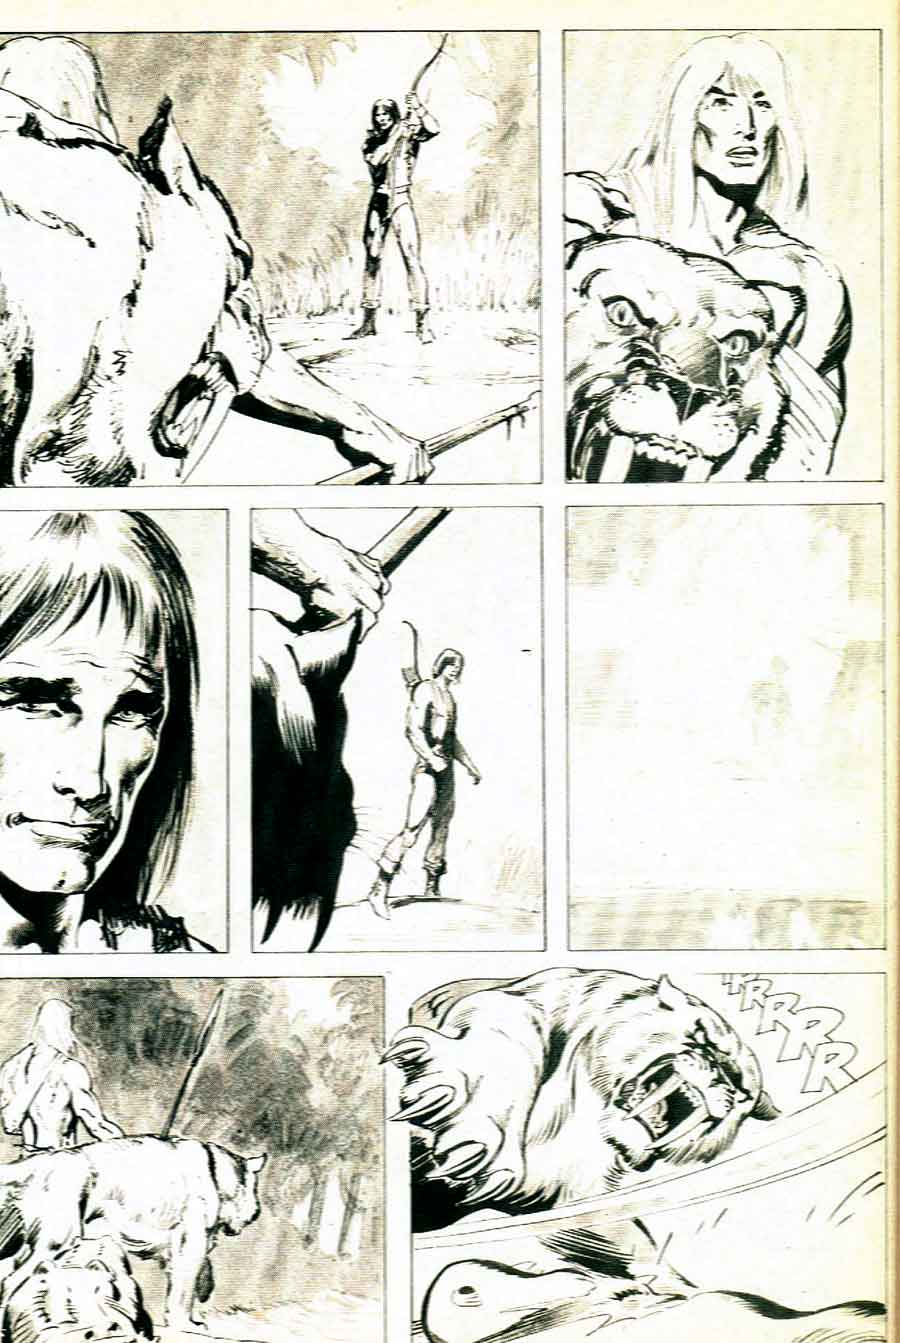 Savage Tales v1 #10 conan marvel comic book page art by Neal Adams